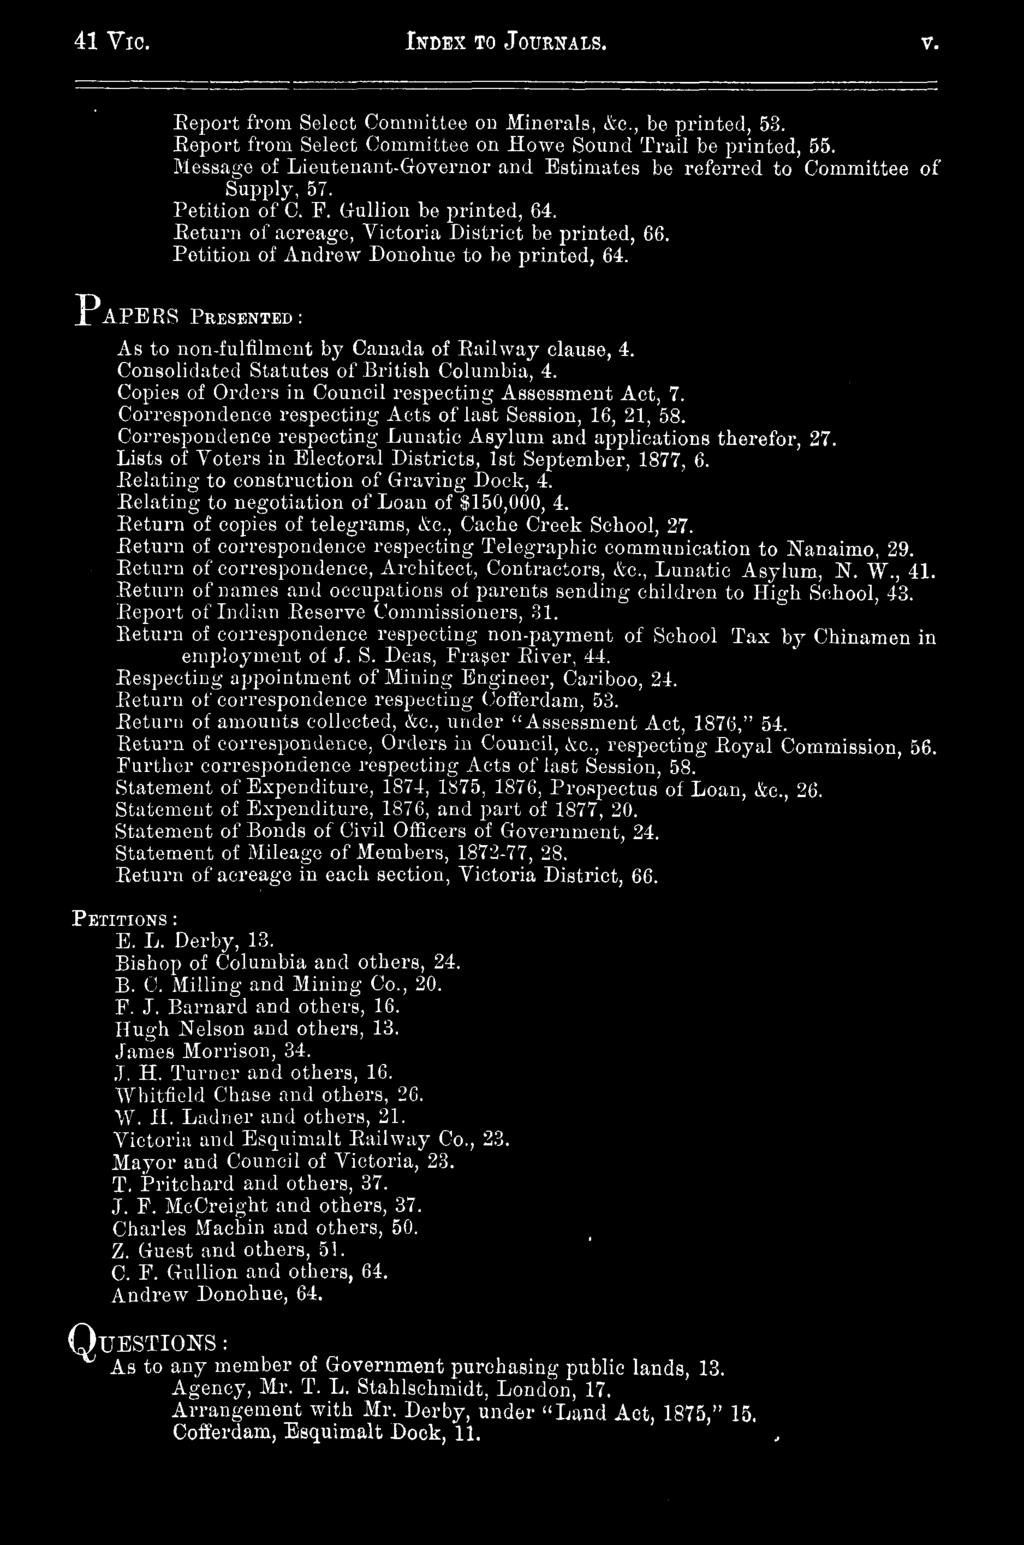 Petition of Andrew Donohue to be printed, 64. PAPERS PRESENTED: As to non-fulfilment by Canada of Railway clause, 4. Consolidated Statutes of British Columbia, 4.